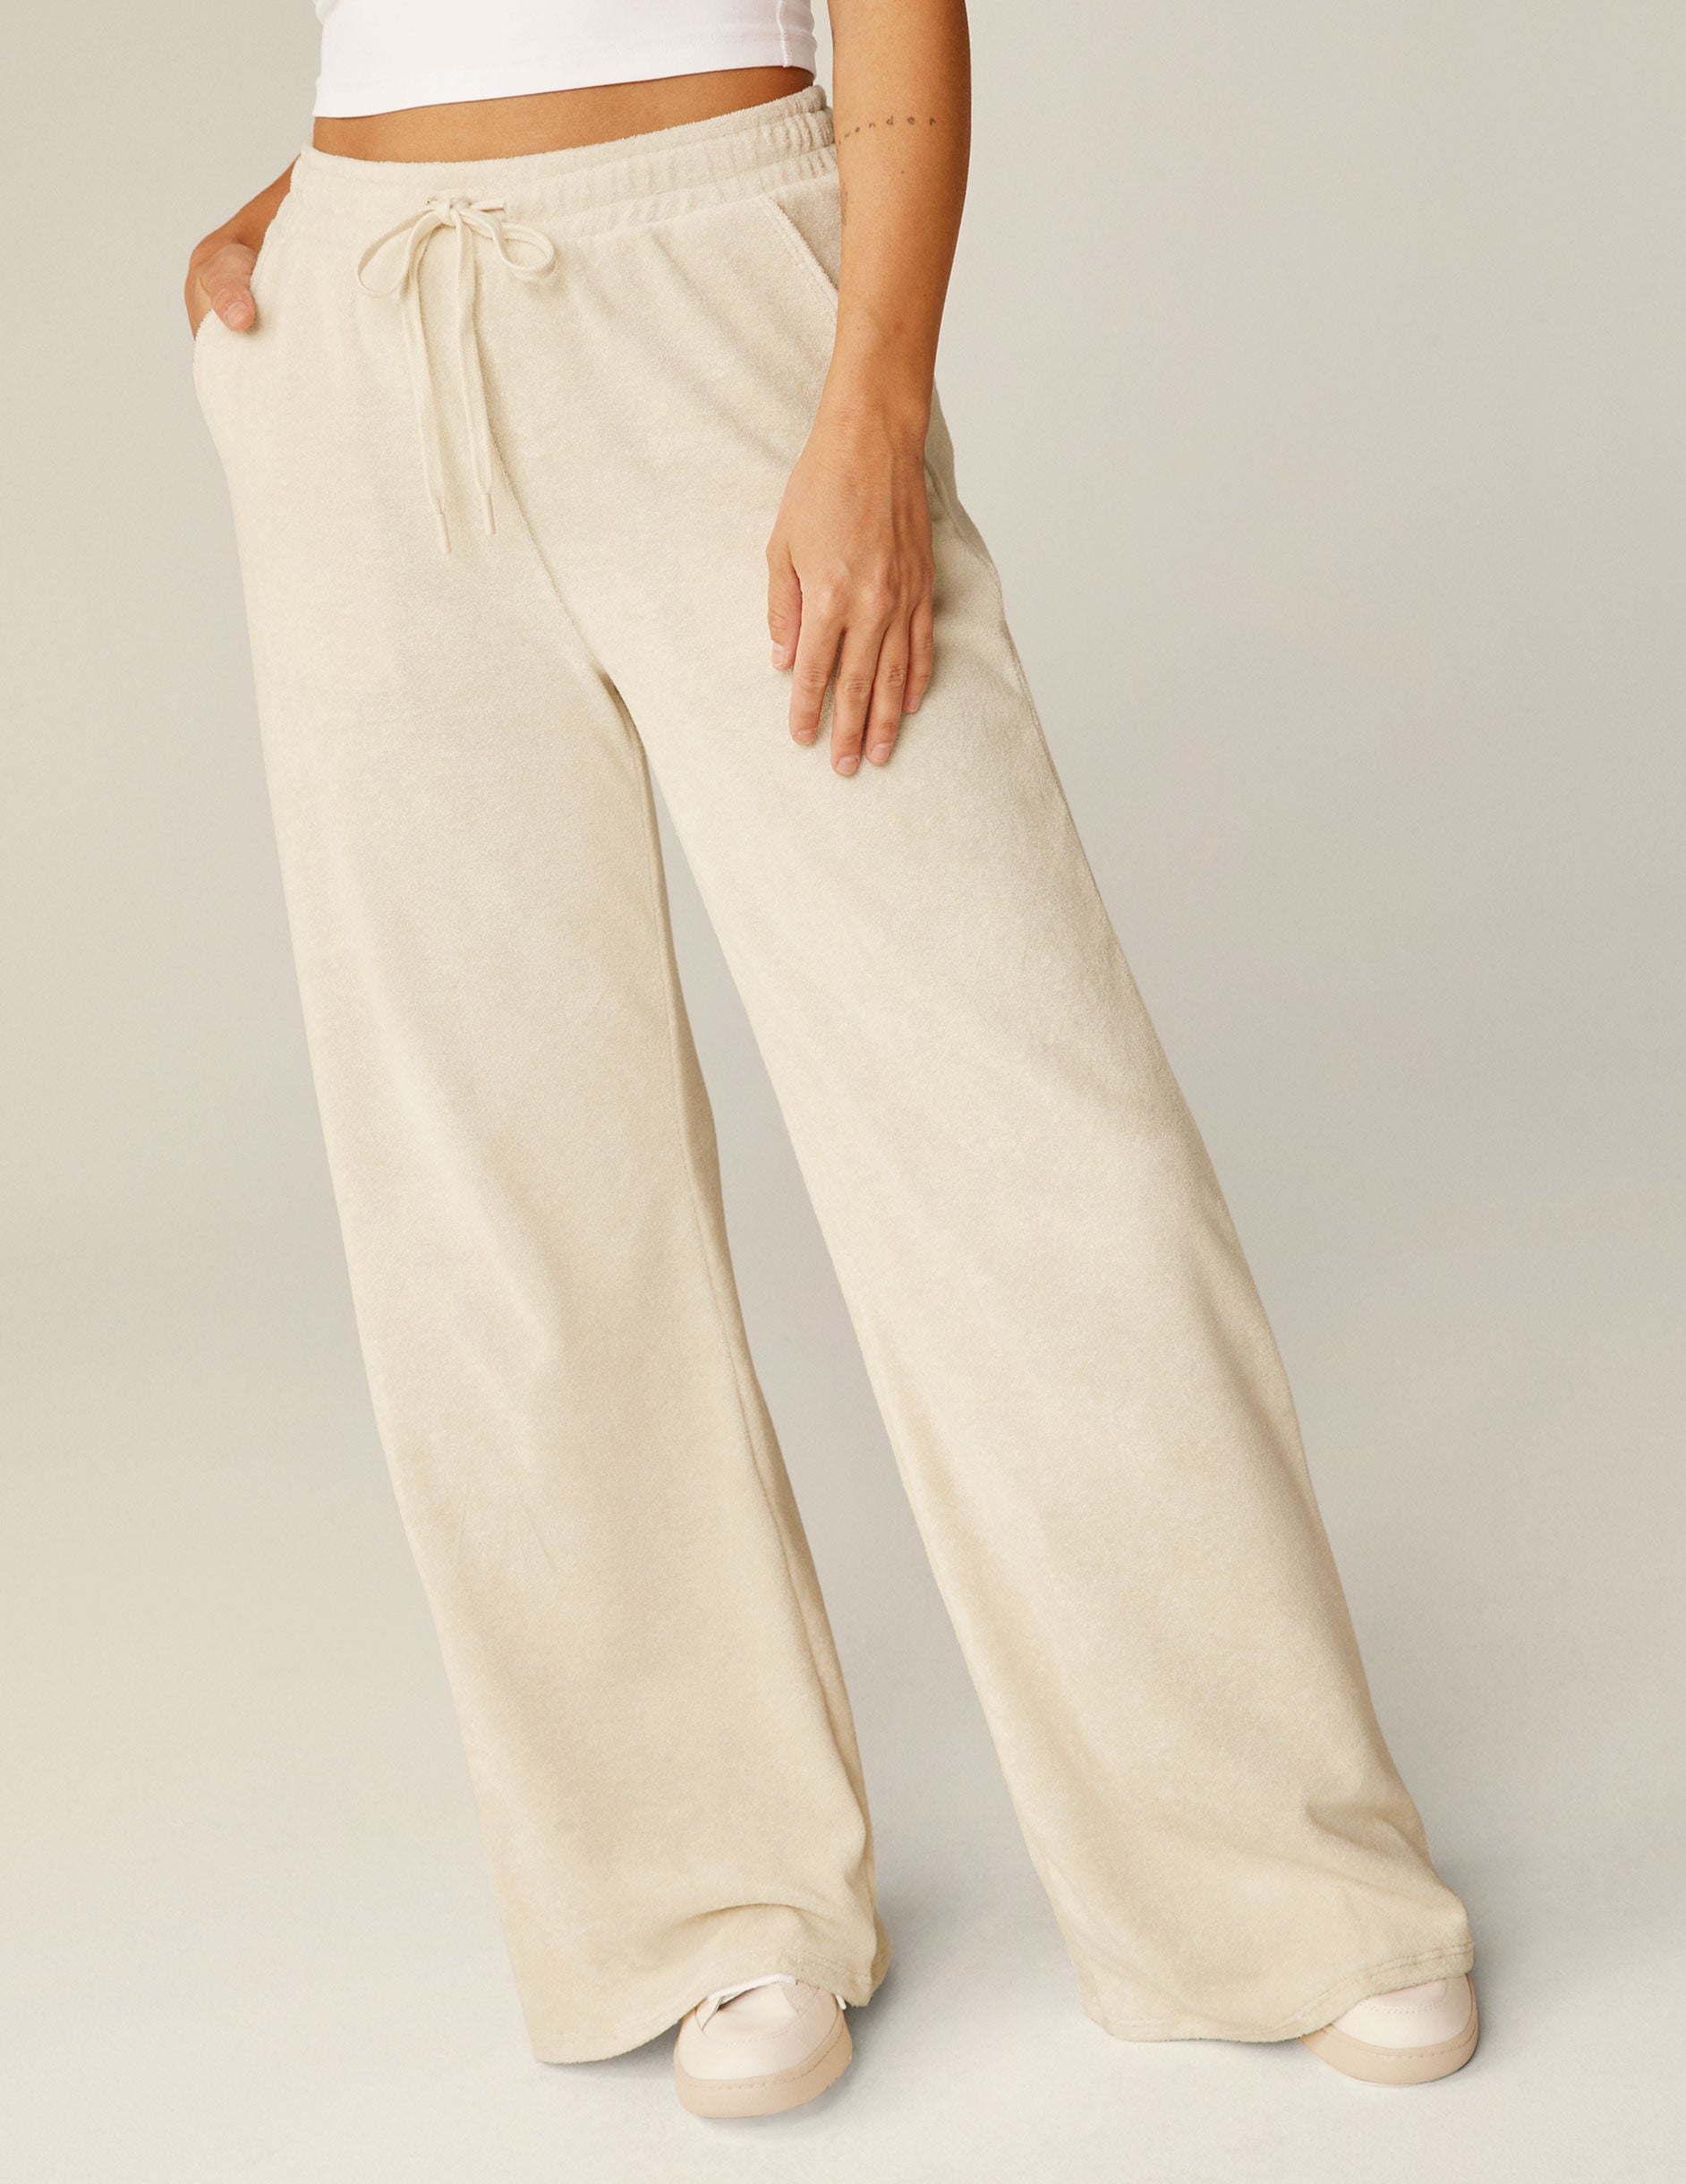 white terry fabric wide leg pants with a drawstring at the waistband. 